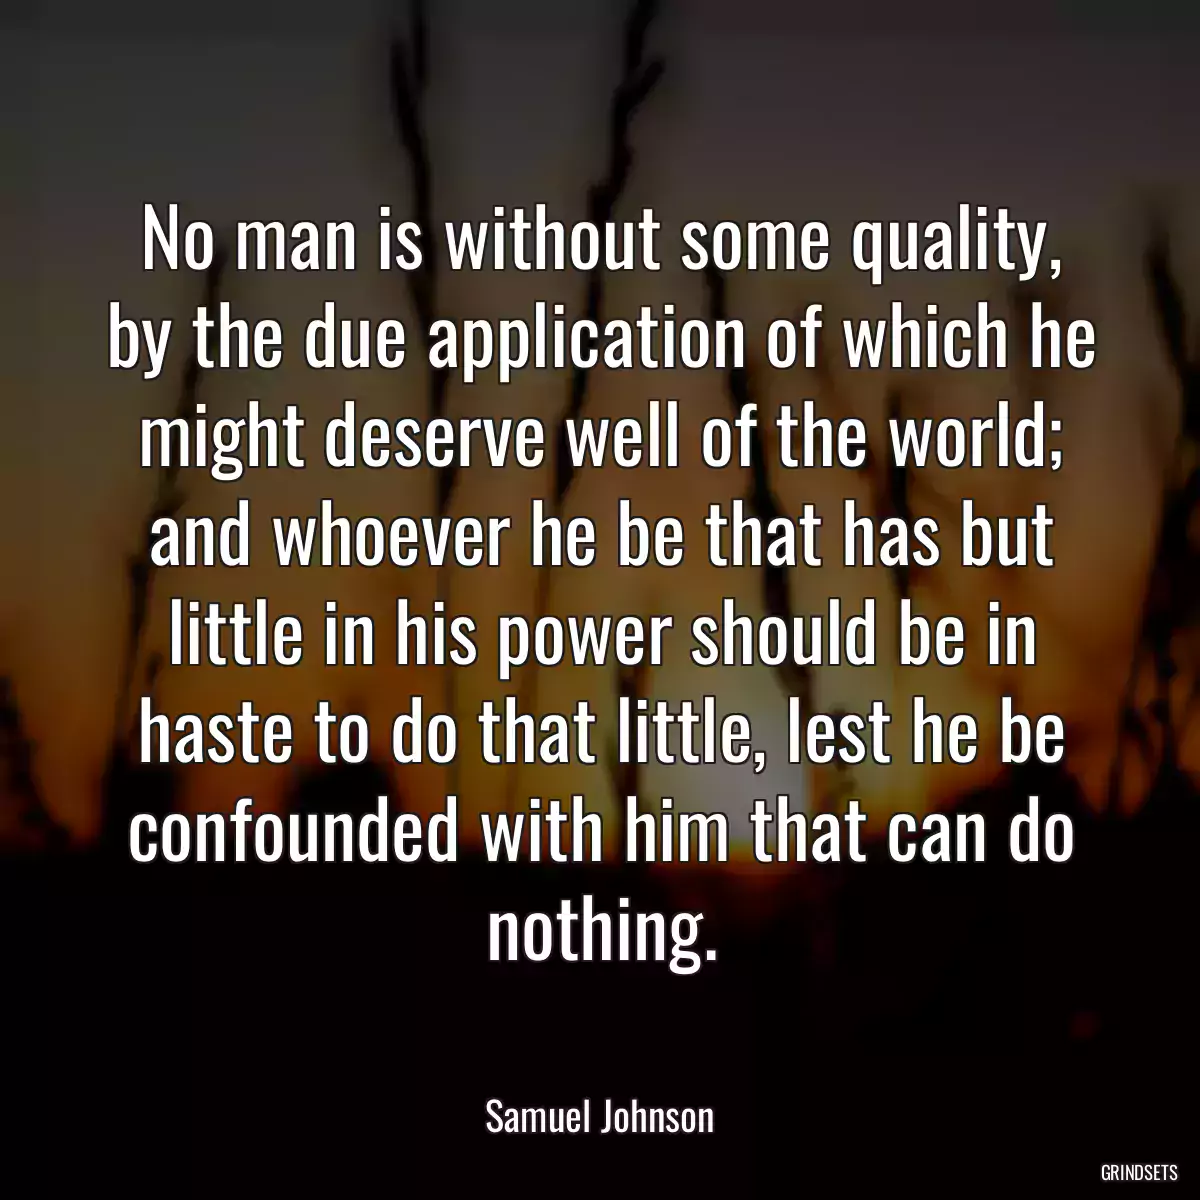 No man is without some quality, by the due application of which he might deserve well of the world; and whoever he be that has but little in his power should be in haste to do that little, lest he be confounded with him that can do nothing.